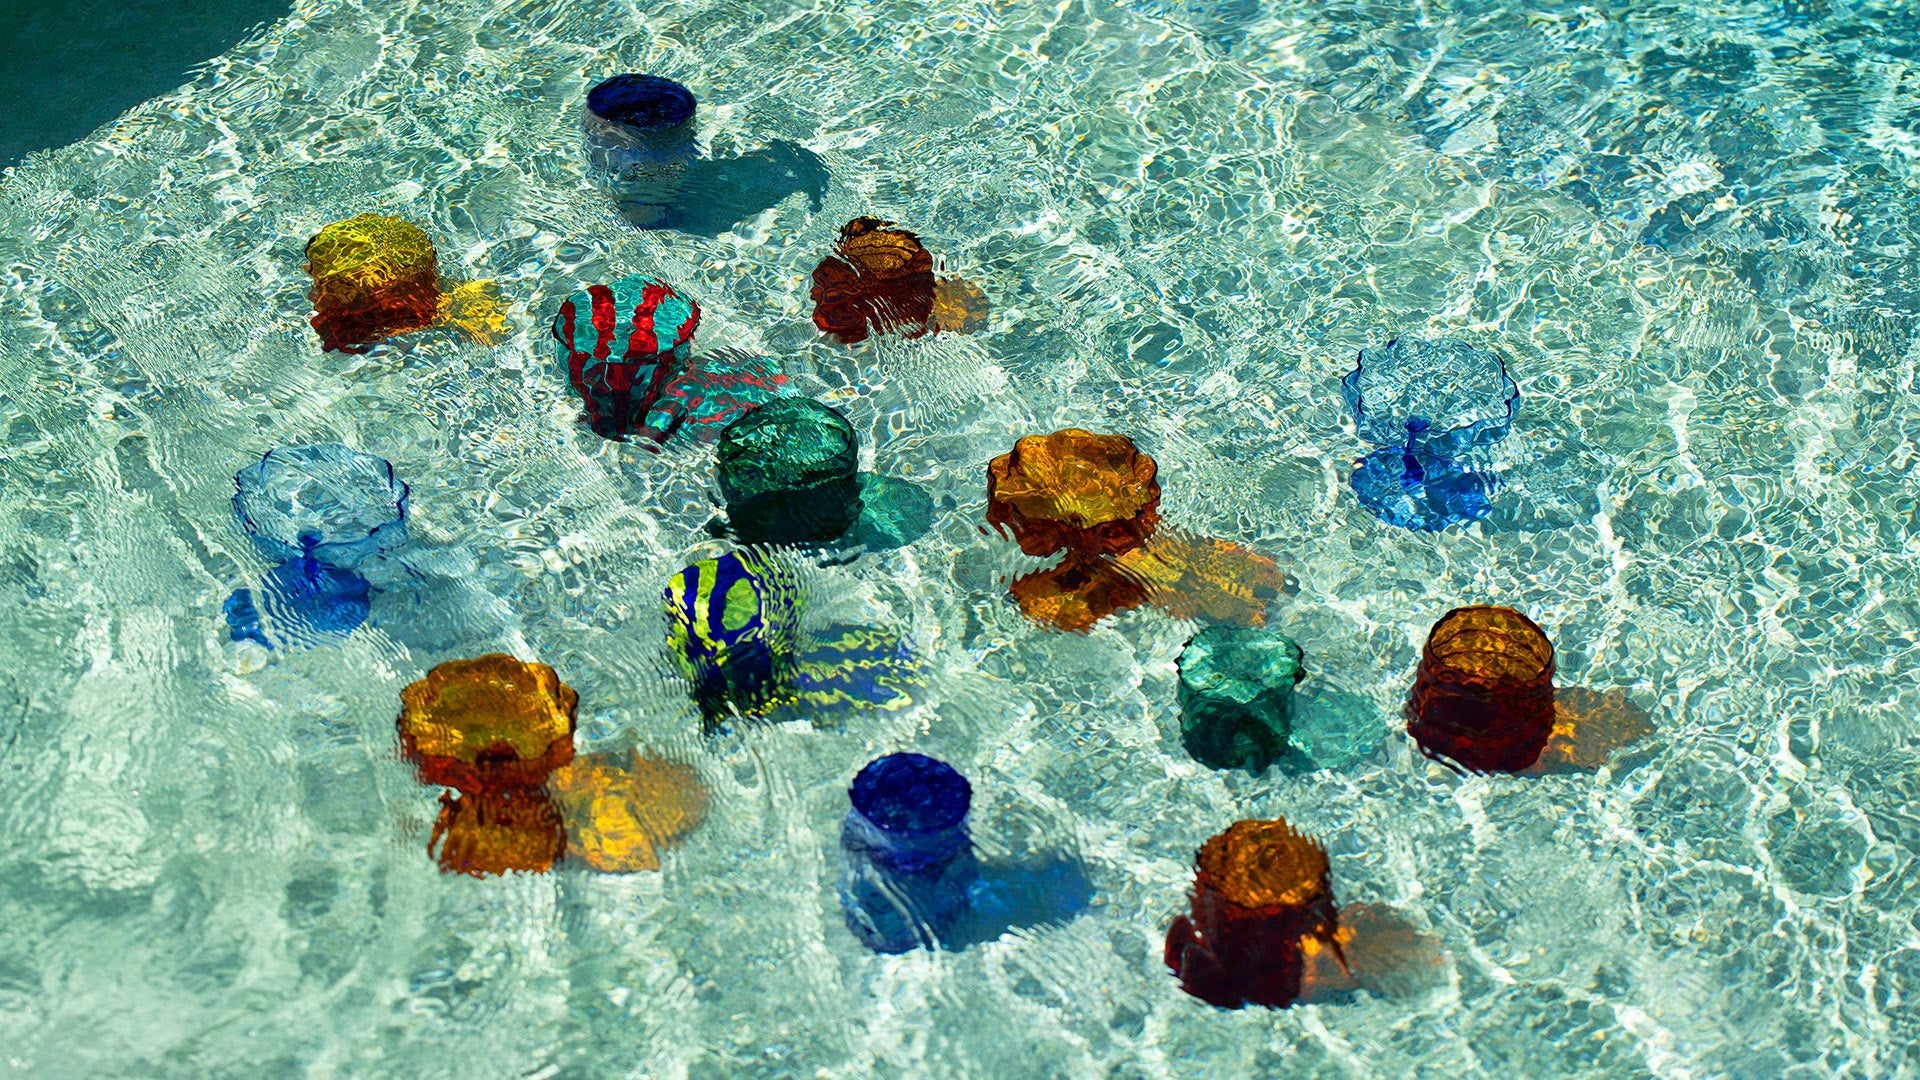 Editorial photo of a mix of colorful glassware under water in a pool